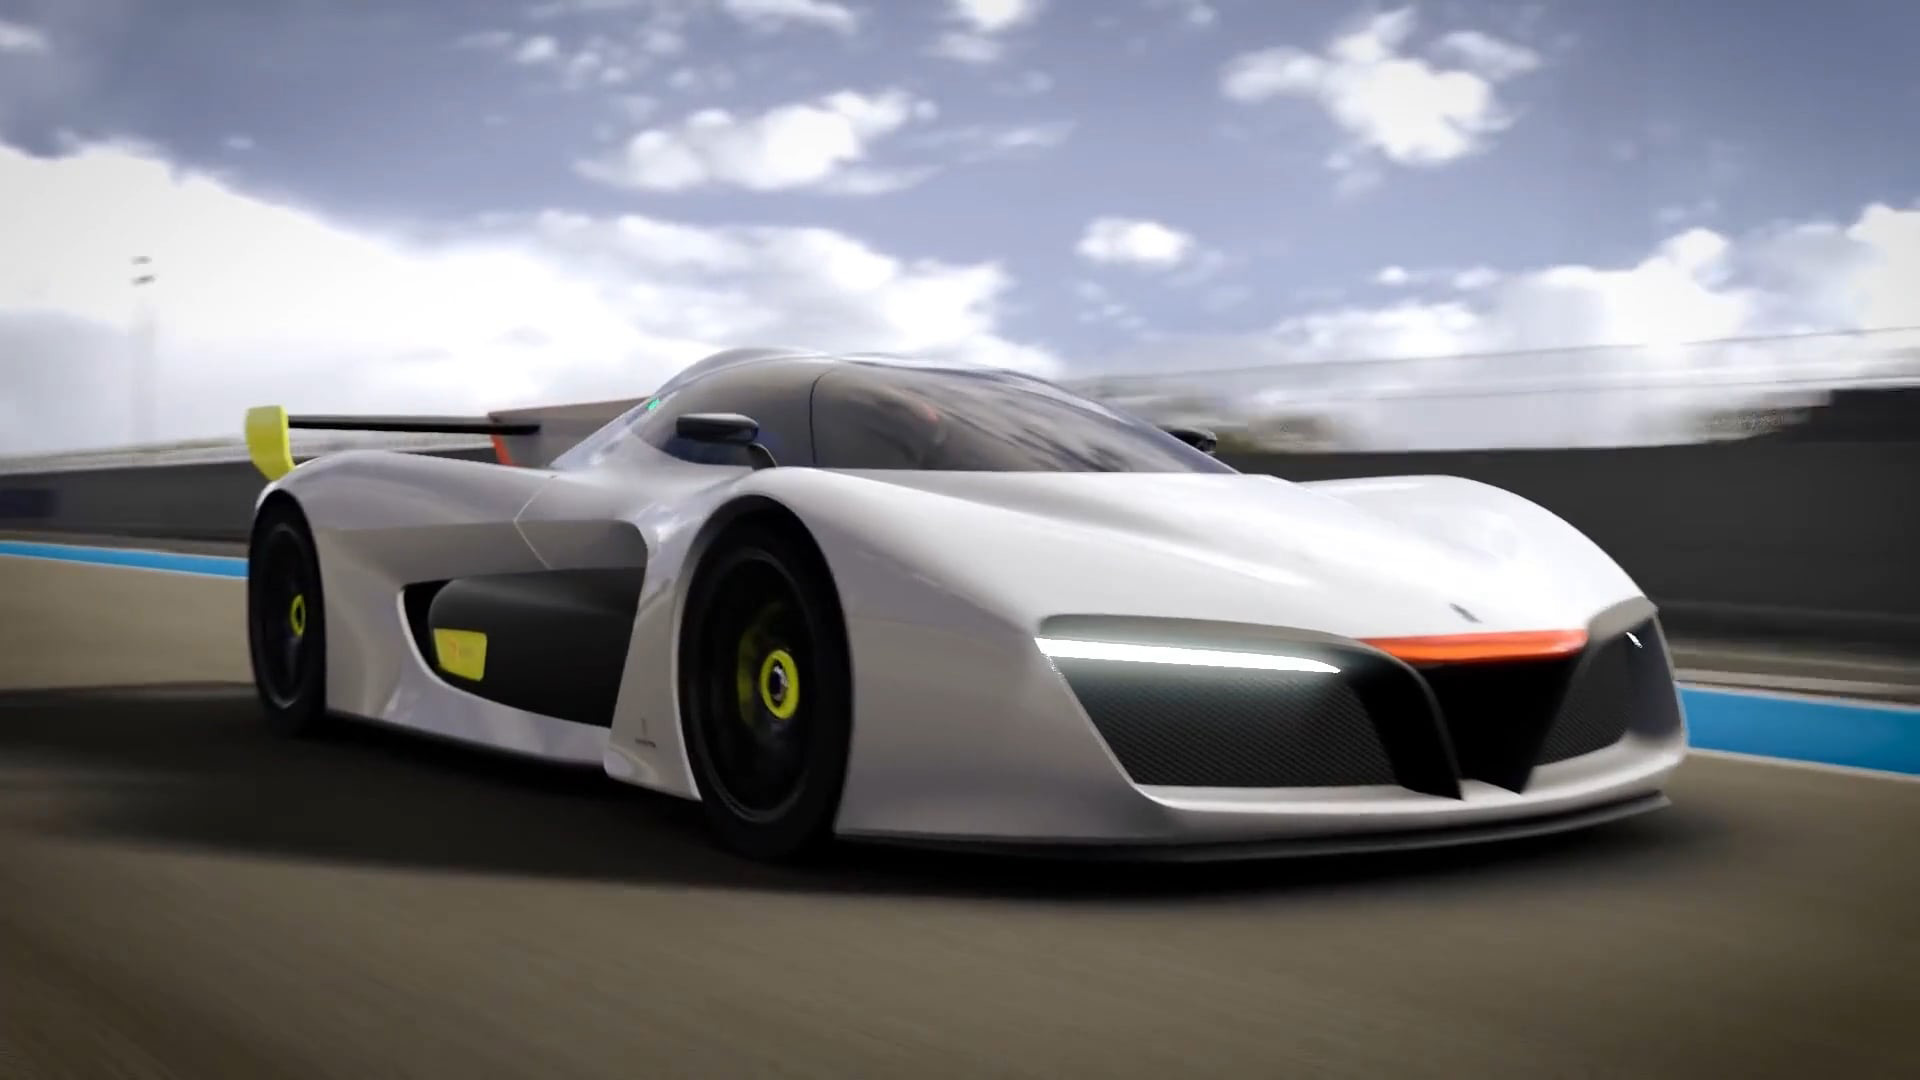 More details on Pininfarina's production plans for H2 Speed supercar